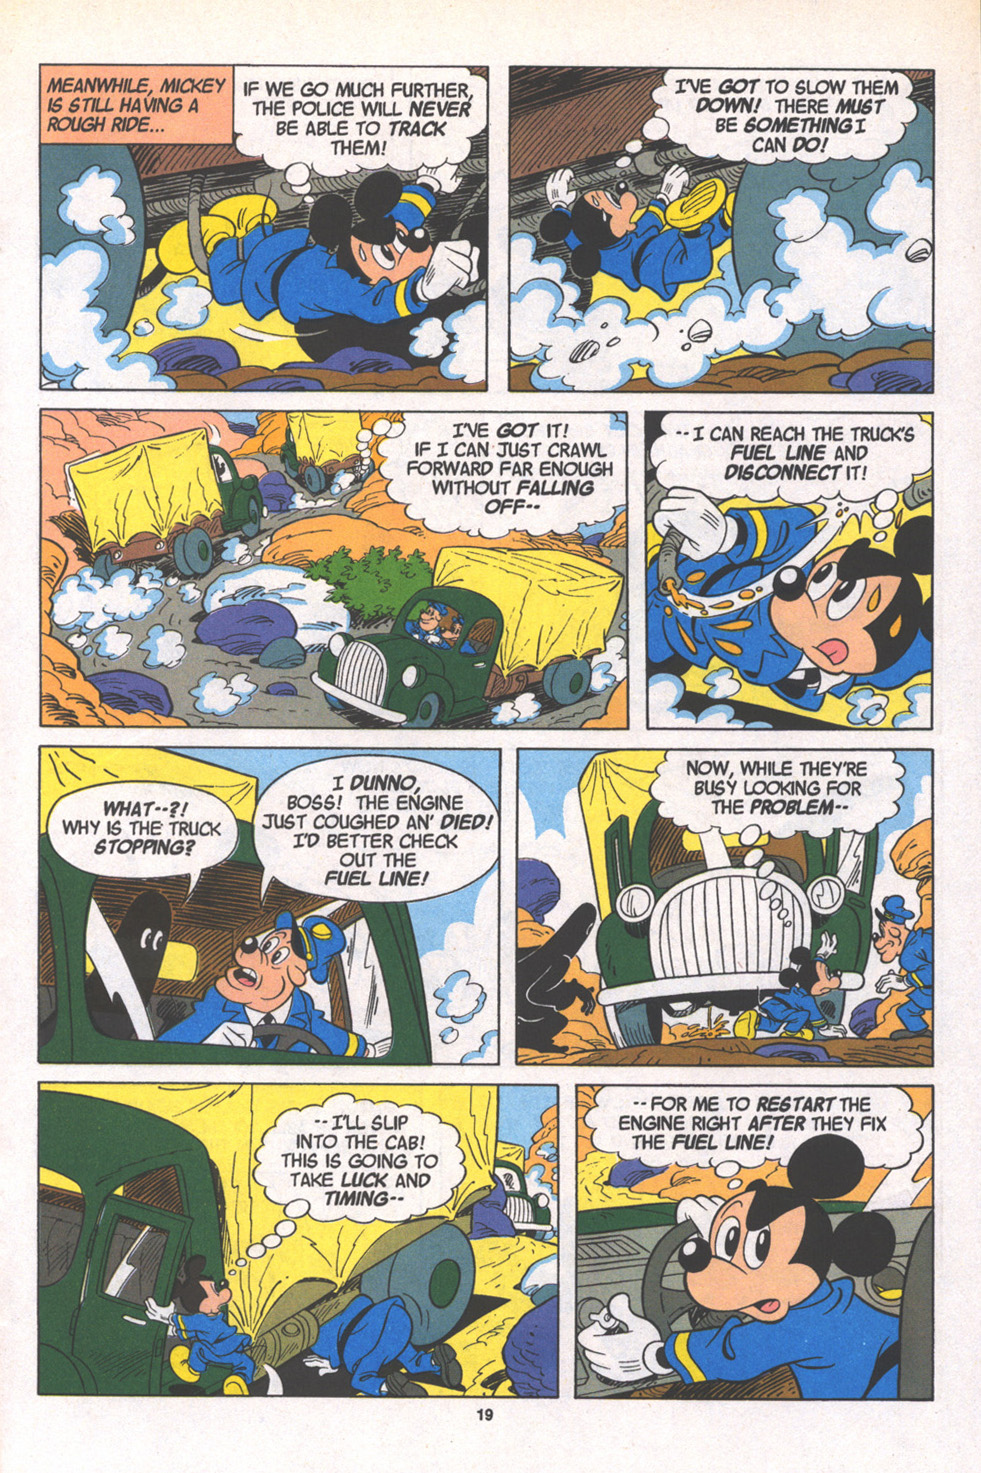 Mickey Mouse Adventures #3 #3 - English 25